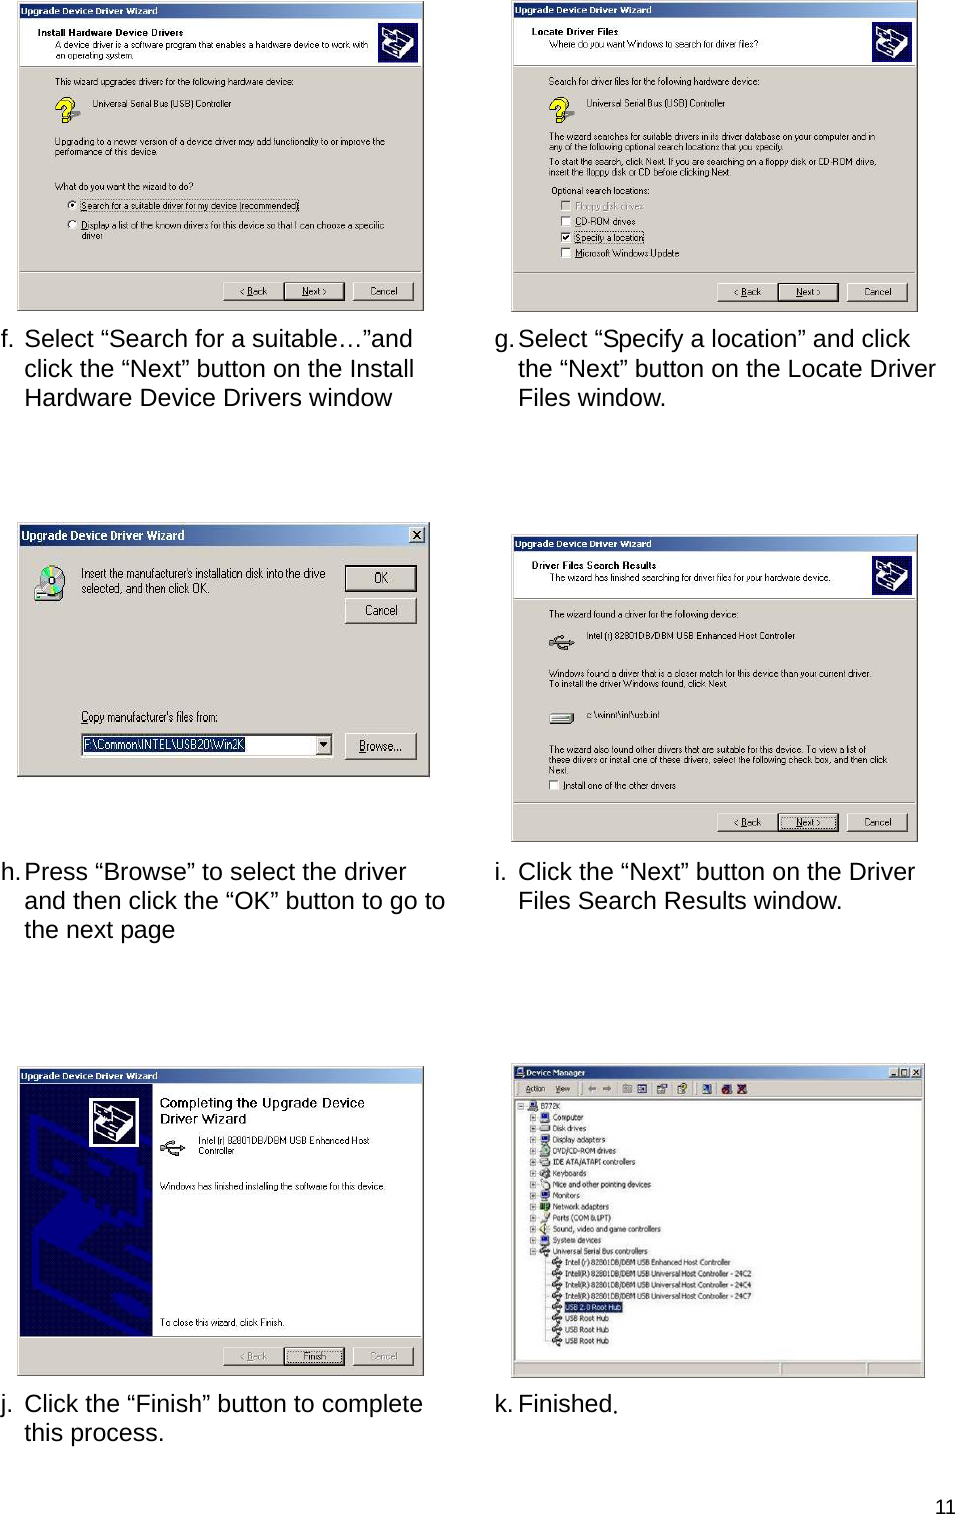  11  f. Select “Search for a suitable…”and click the “Next” button on the Install Hardware Device Drivers window g. Select “Specify a location” and click the “Next” button on the Locate Driver Files window.     h. Press “Browse” to select the driver and then click the “OK” button to go to the next page i.  Click the “Next” button on the Driver Files Search Results window.     j.  Click the “Finish” button to complete this process.  k. Finished. 